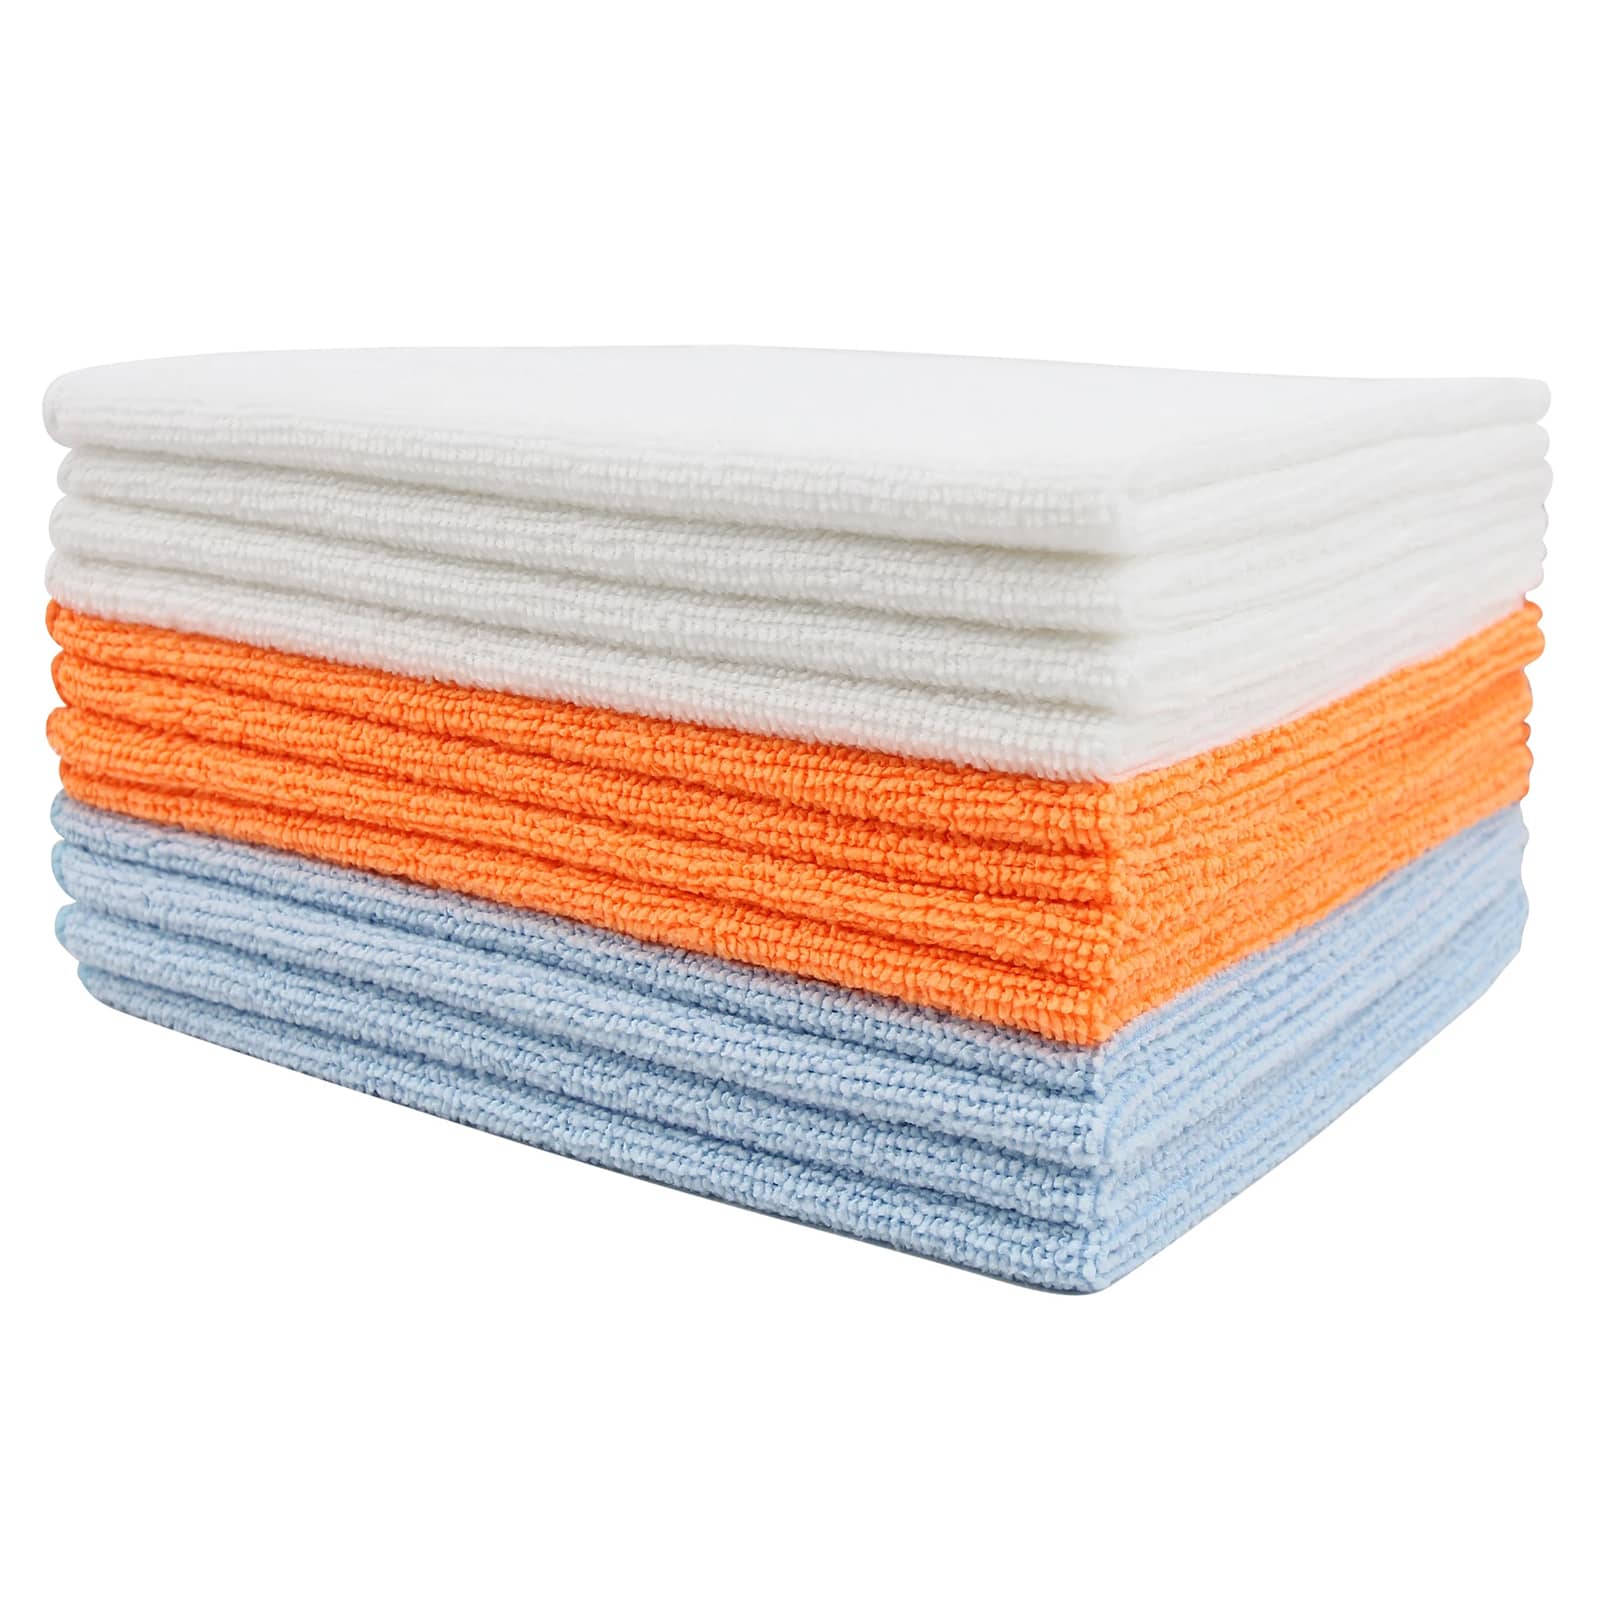 https://cdn.apartmenttherapy.info/image/upload/v1621432654/gen-workflow/product-database/recycled-microfiber-cleanong-cloths.jpg